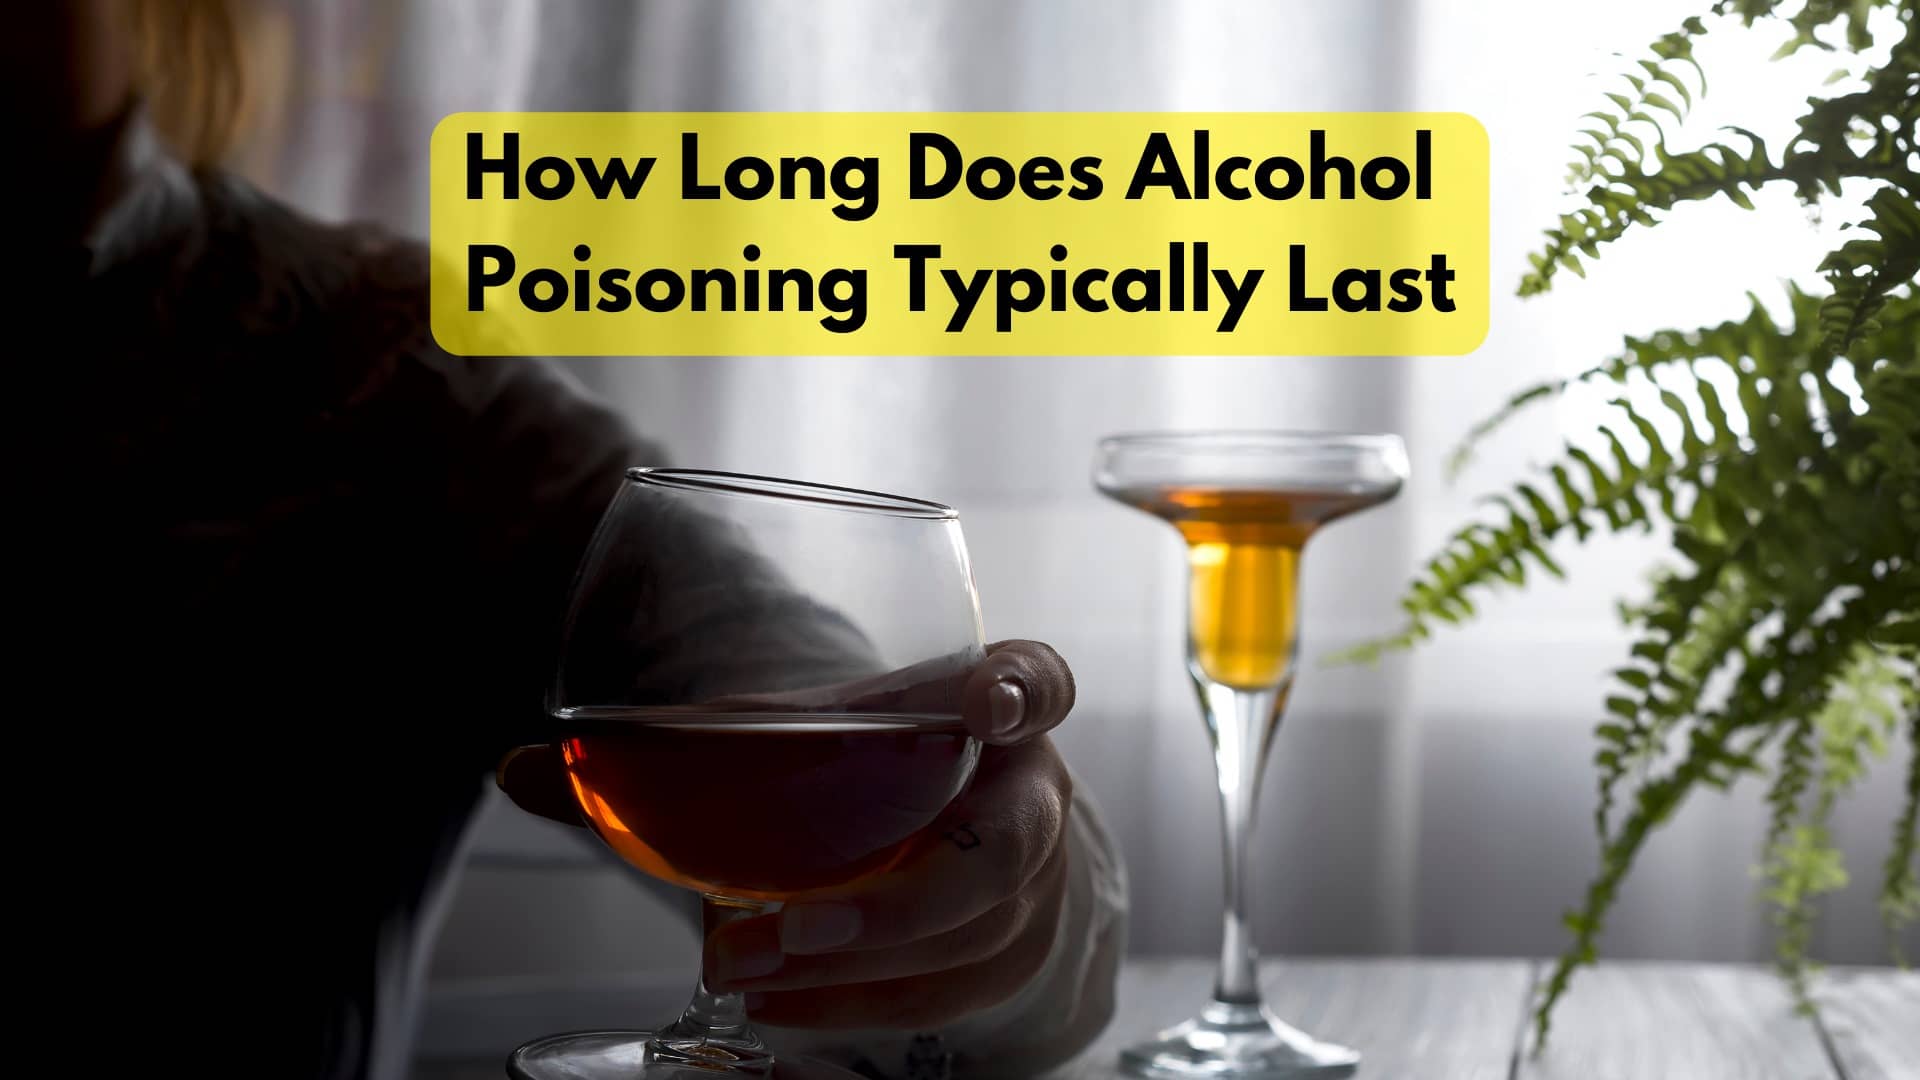 How Long Does Alcohol Poisoning Typically Last